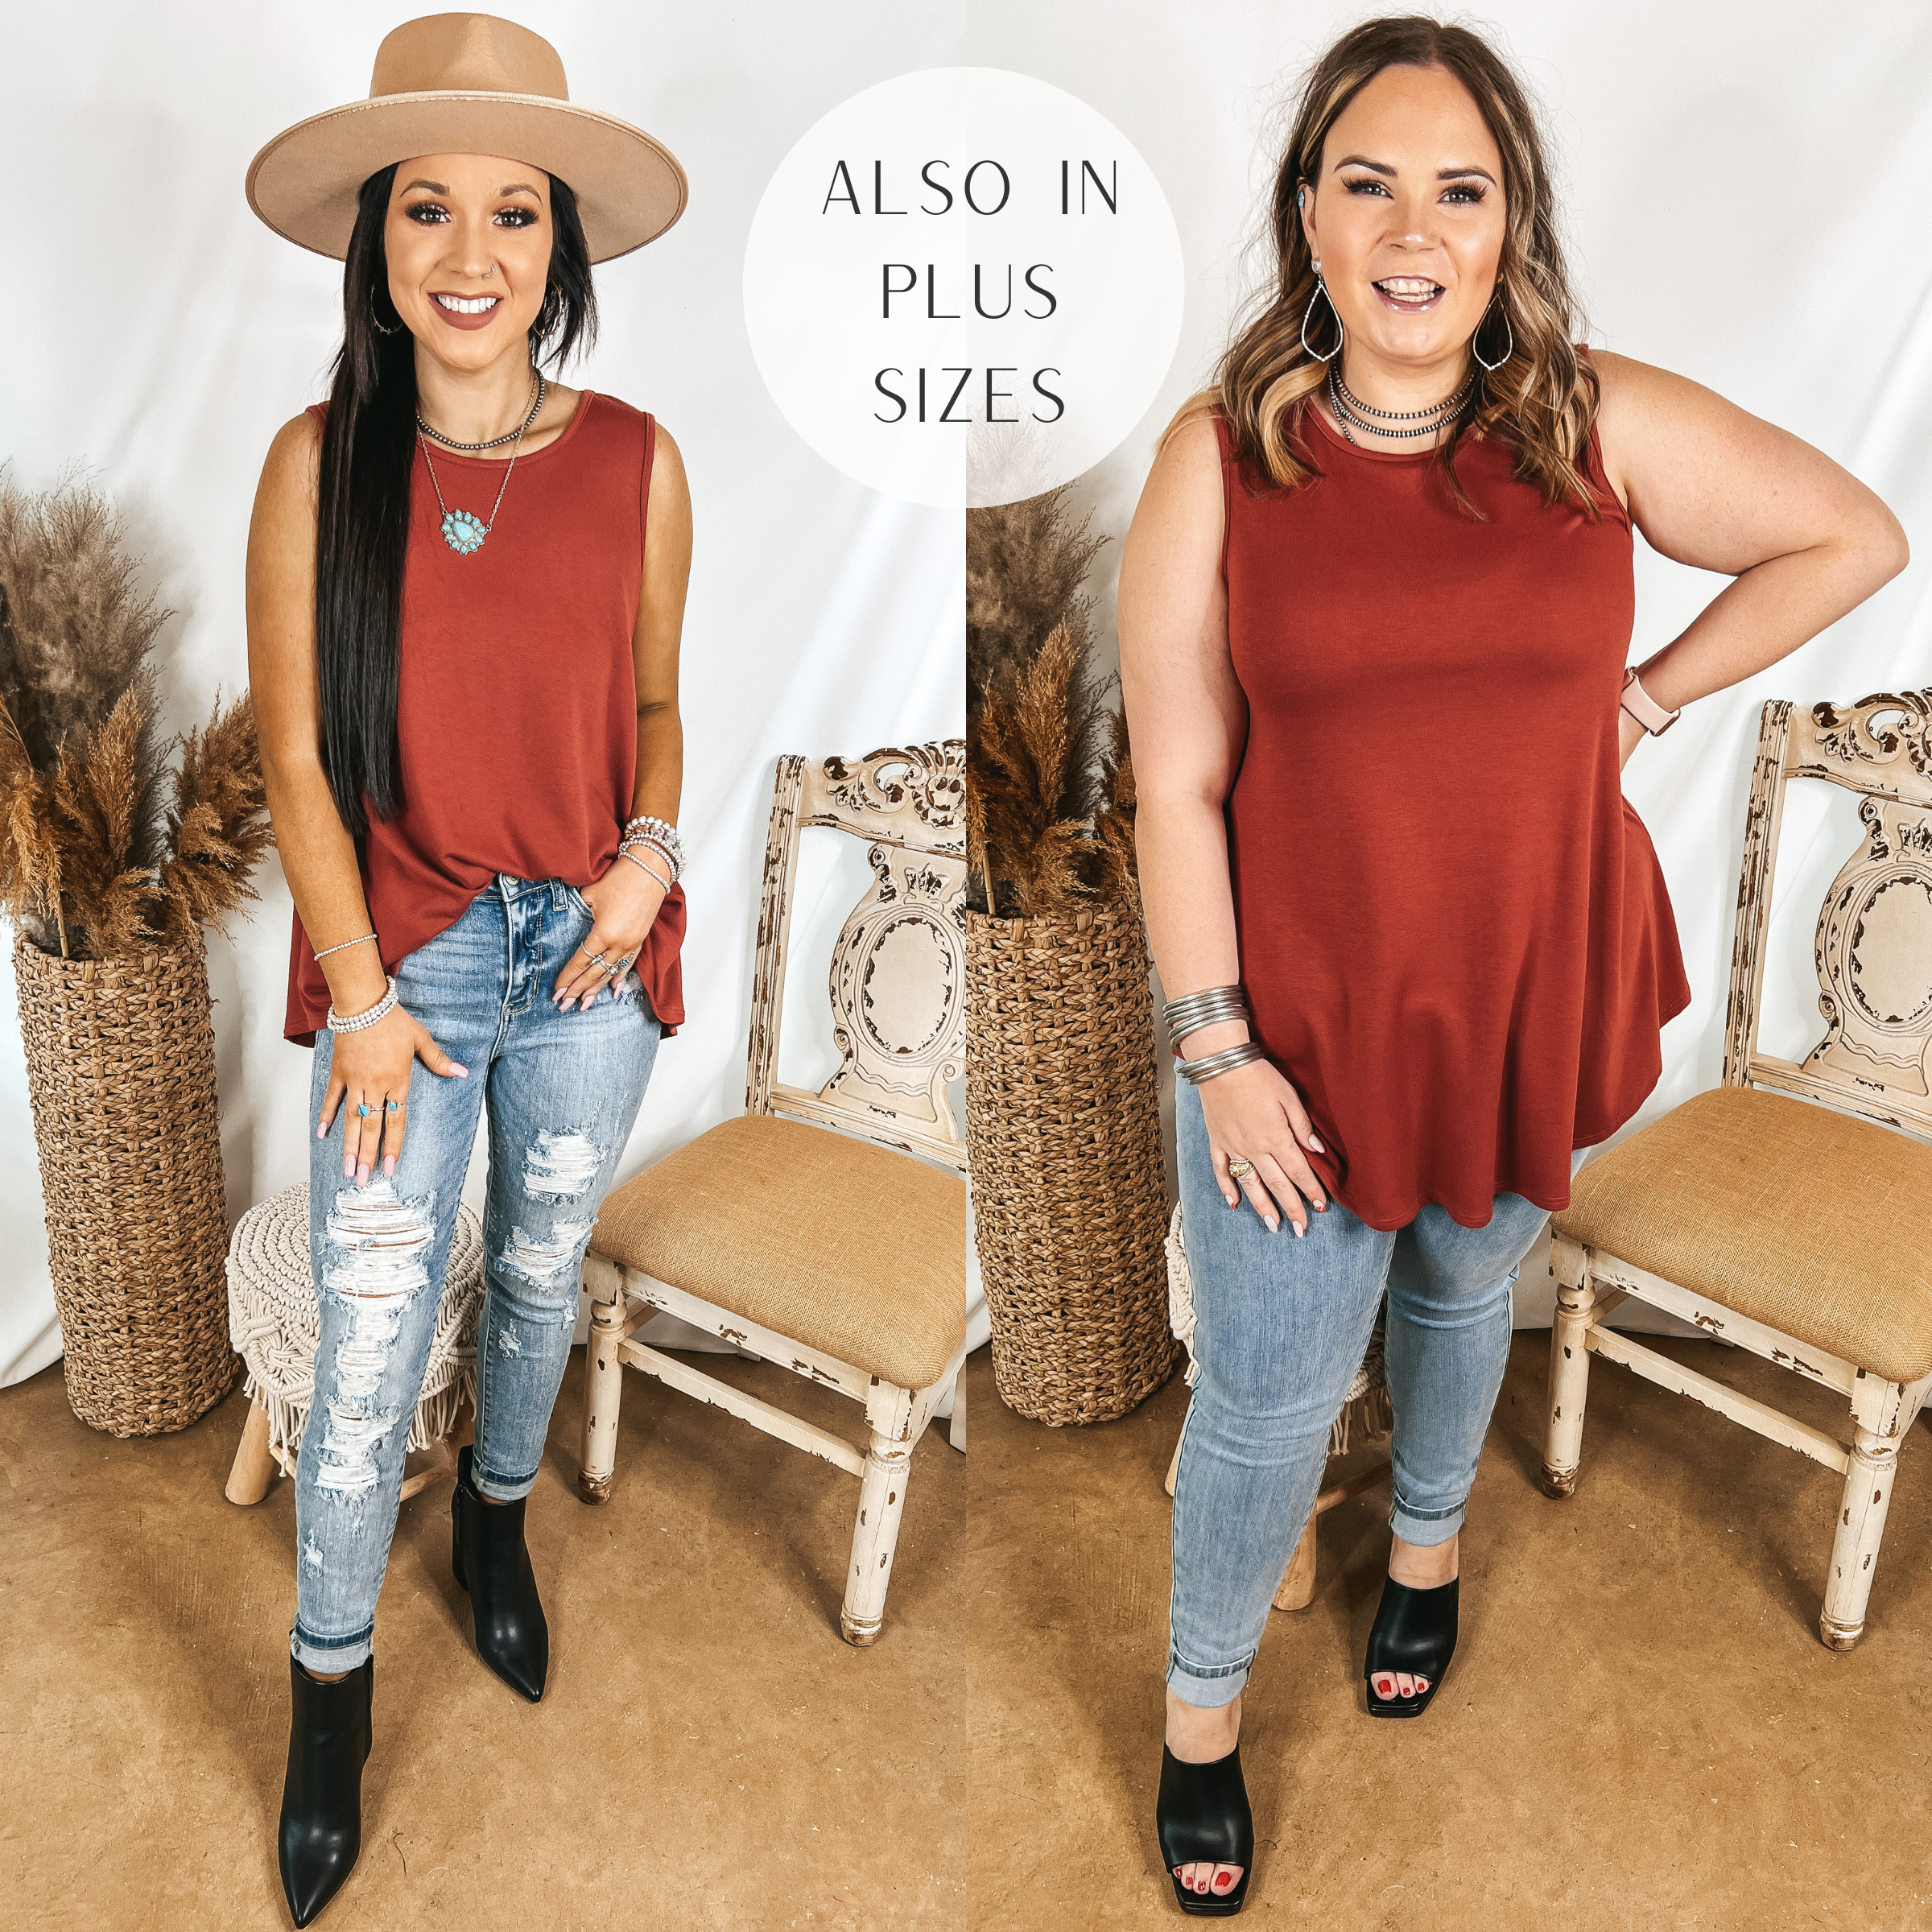 Models are wearing a rust red tank top. Size small model has it paired with distressed jeans, black booties, and a tan hat. Size large model has it paired with light wash jeggings, black heels, and silver jewelry.